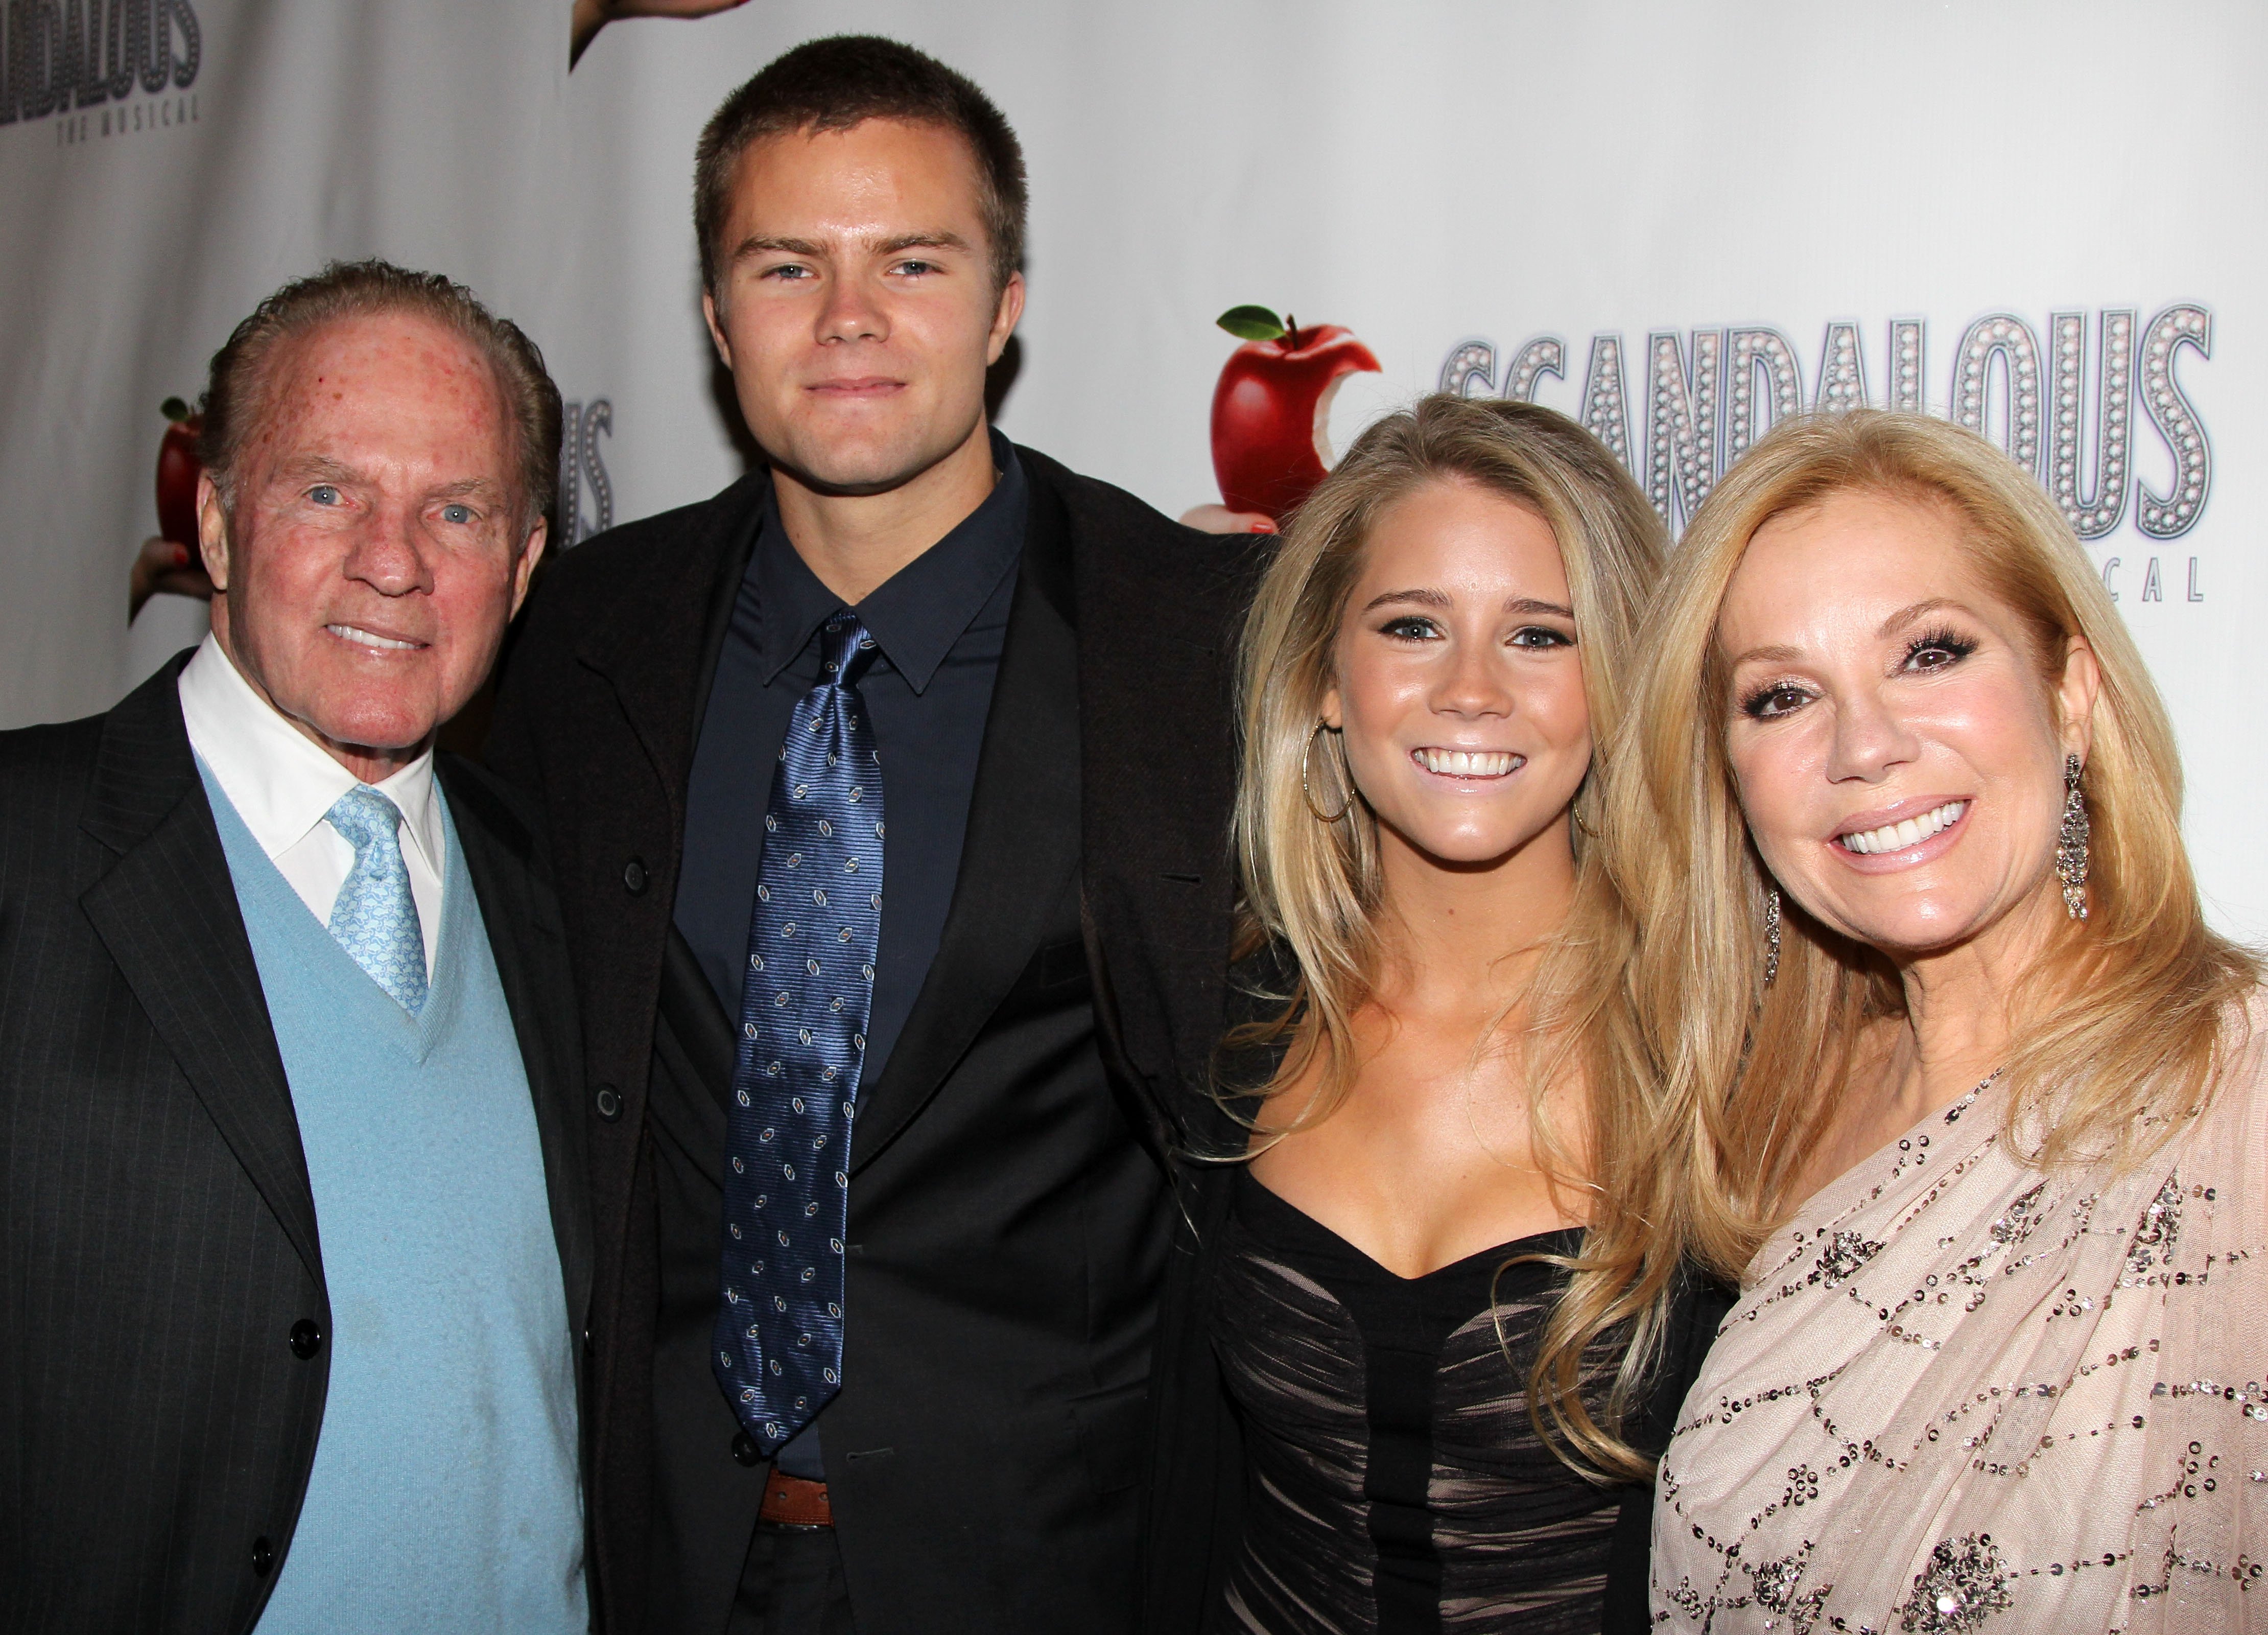 Frank Gifford, Kathie Lee Gifford, Cassidy Gifford and Cody Gifford attends the "Scandalous" Broadway Opening Night at Neil Simon Theatre on November 15, 2012 in New York City. | Source: Getty Images